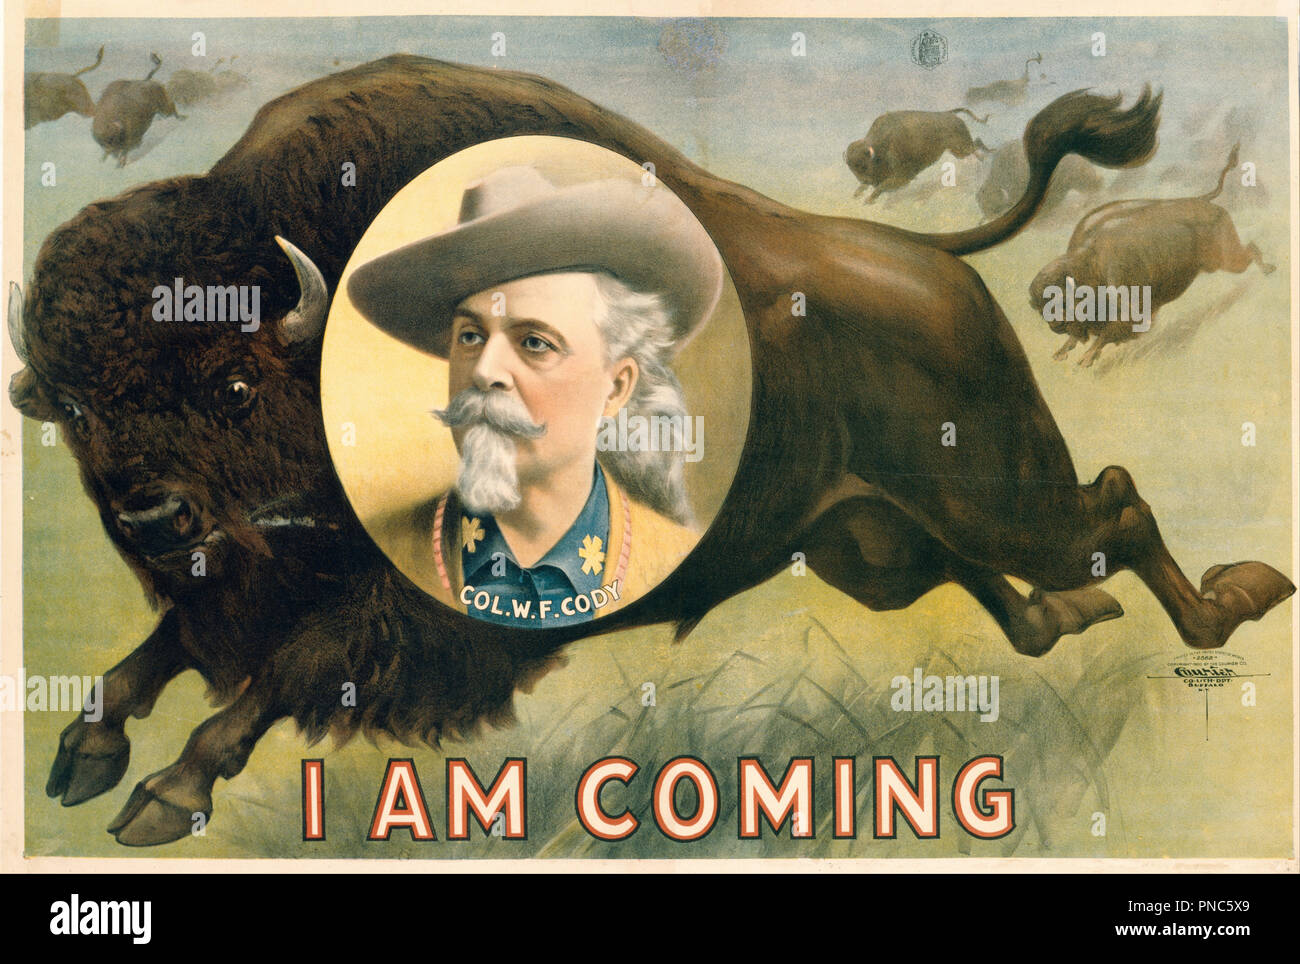 'Buffalo Bill' Cody. Date/Period: 1900. Chromolithographic poster. Print. Height: 673 mm (26.49 in); Width: 1,031 mm (40.59 in). Author: Courier Lithography Company. Stock Photo